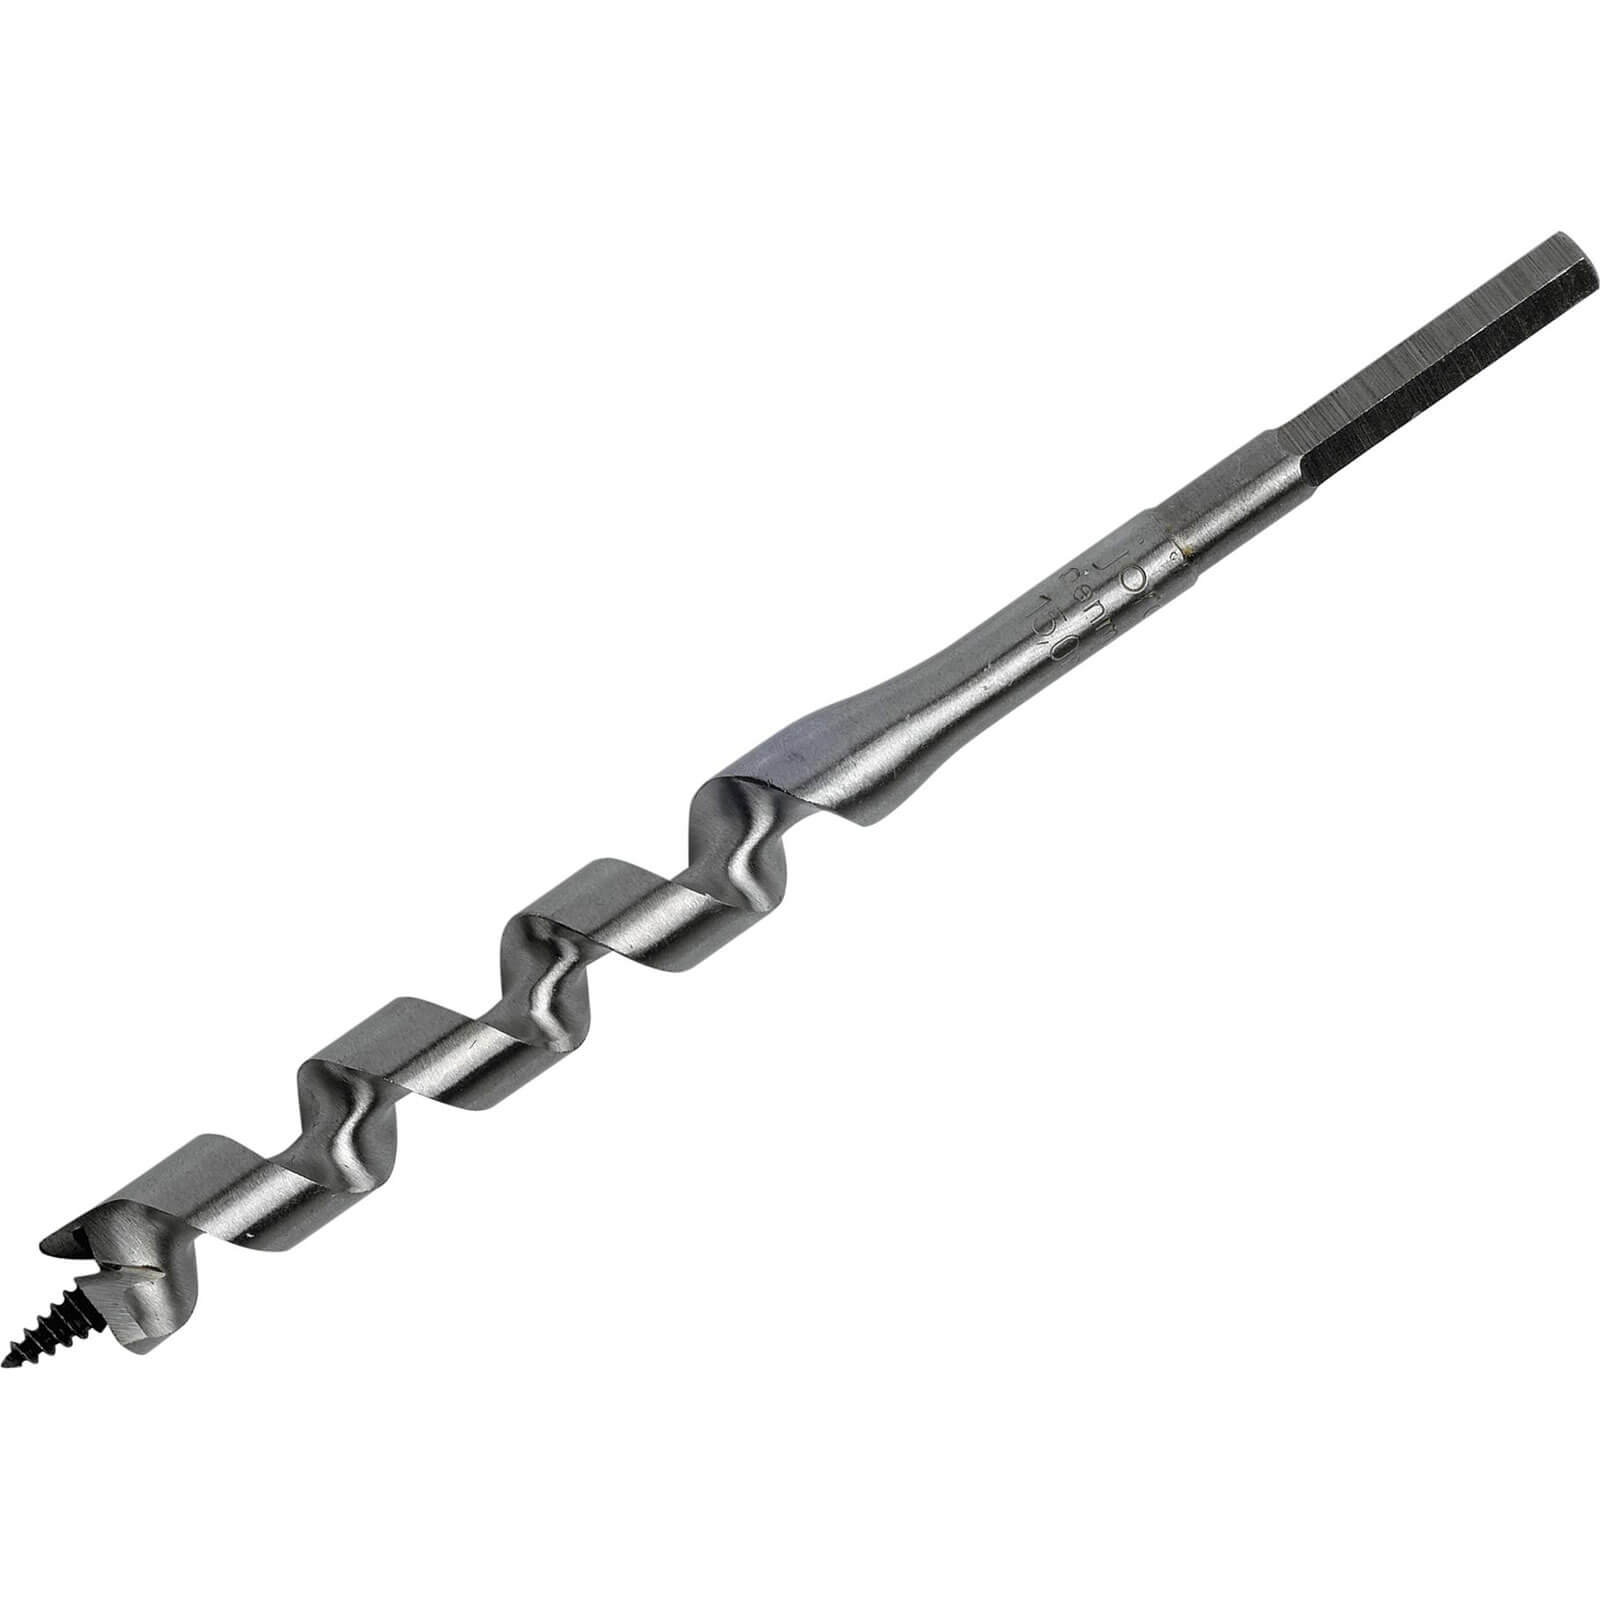 Image of Irwin Wood Auger Drill Bit 25mm 191mm